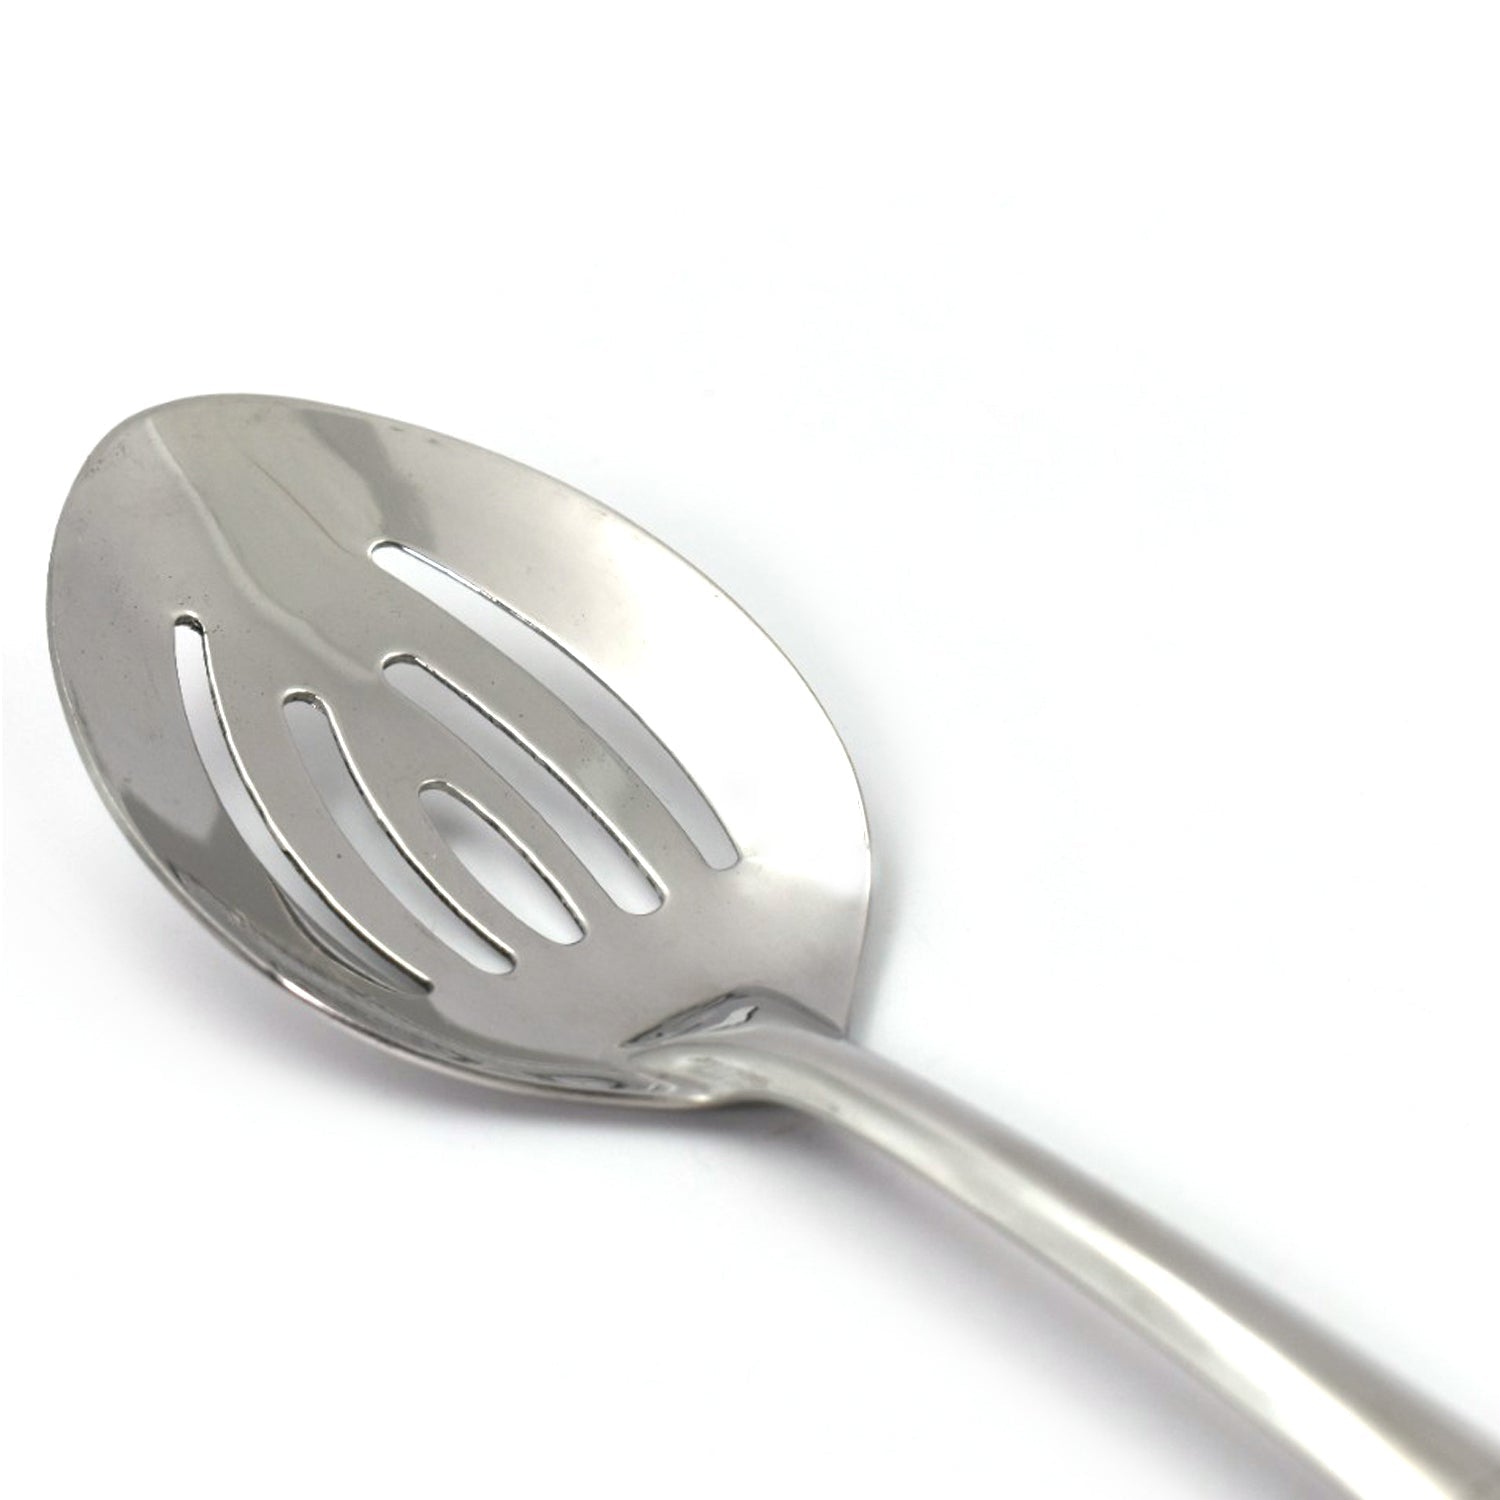 7040 SS Frying Spoon for serving and having food stuffs and items which needs to be fried and crispy.